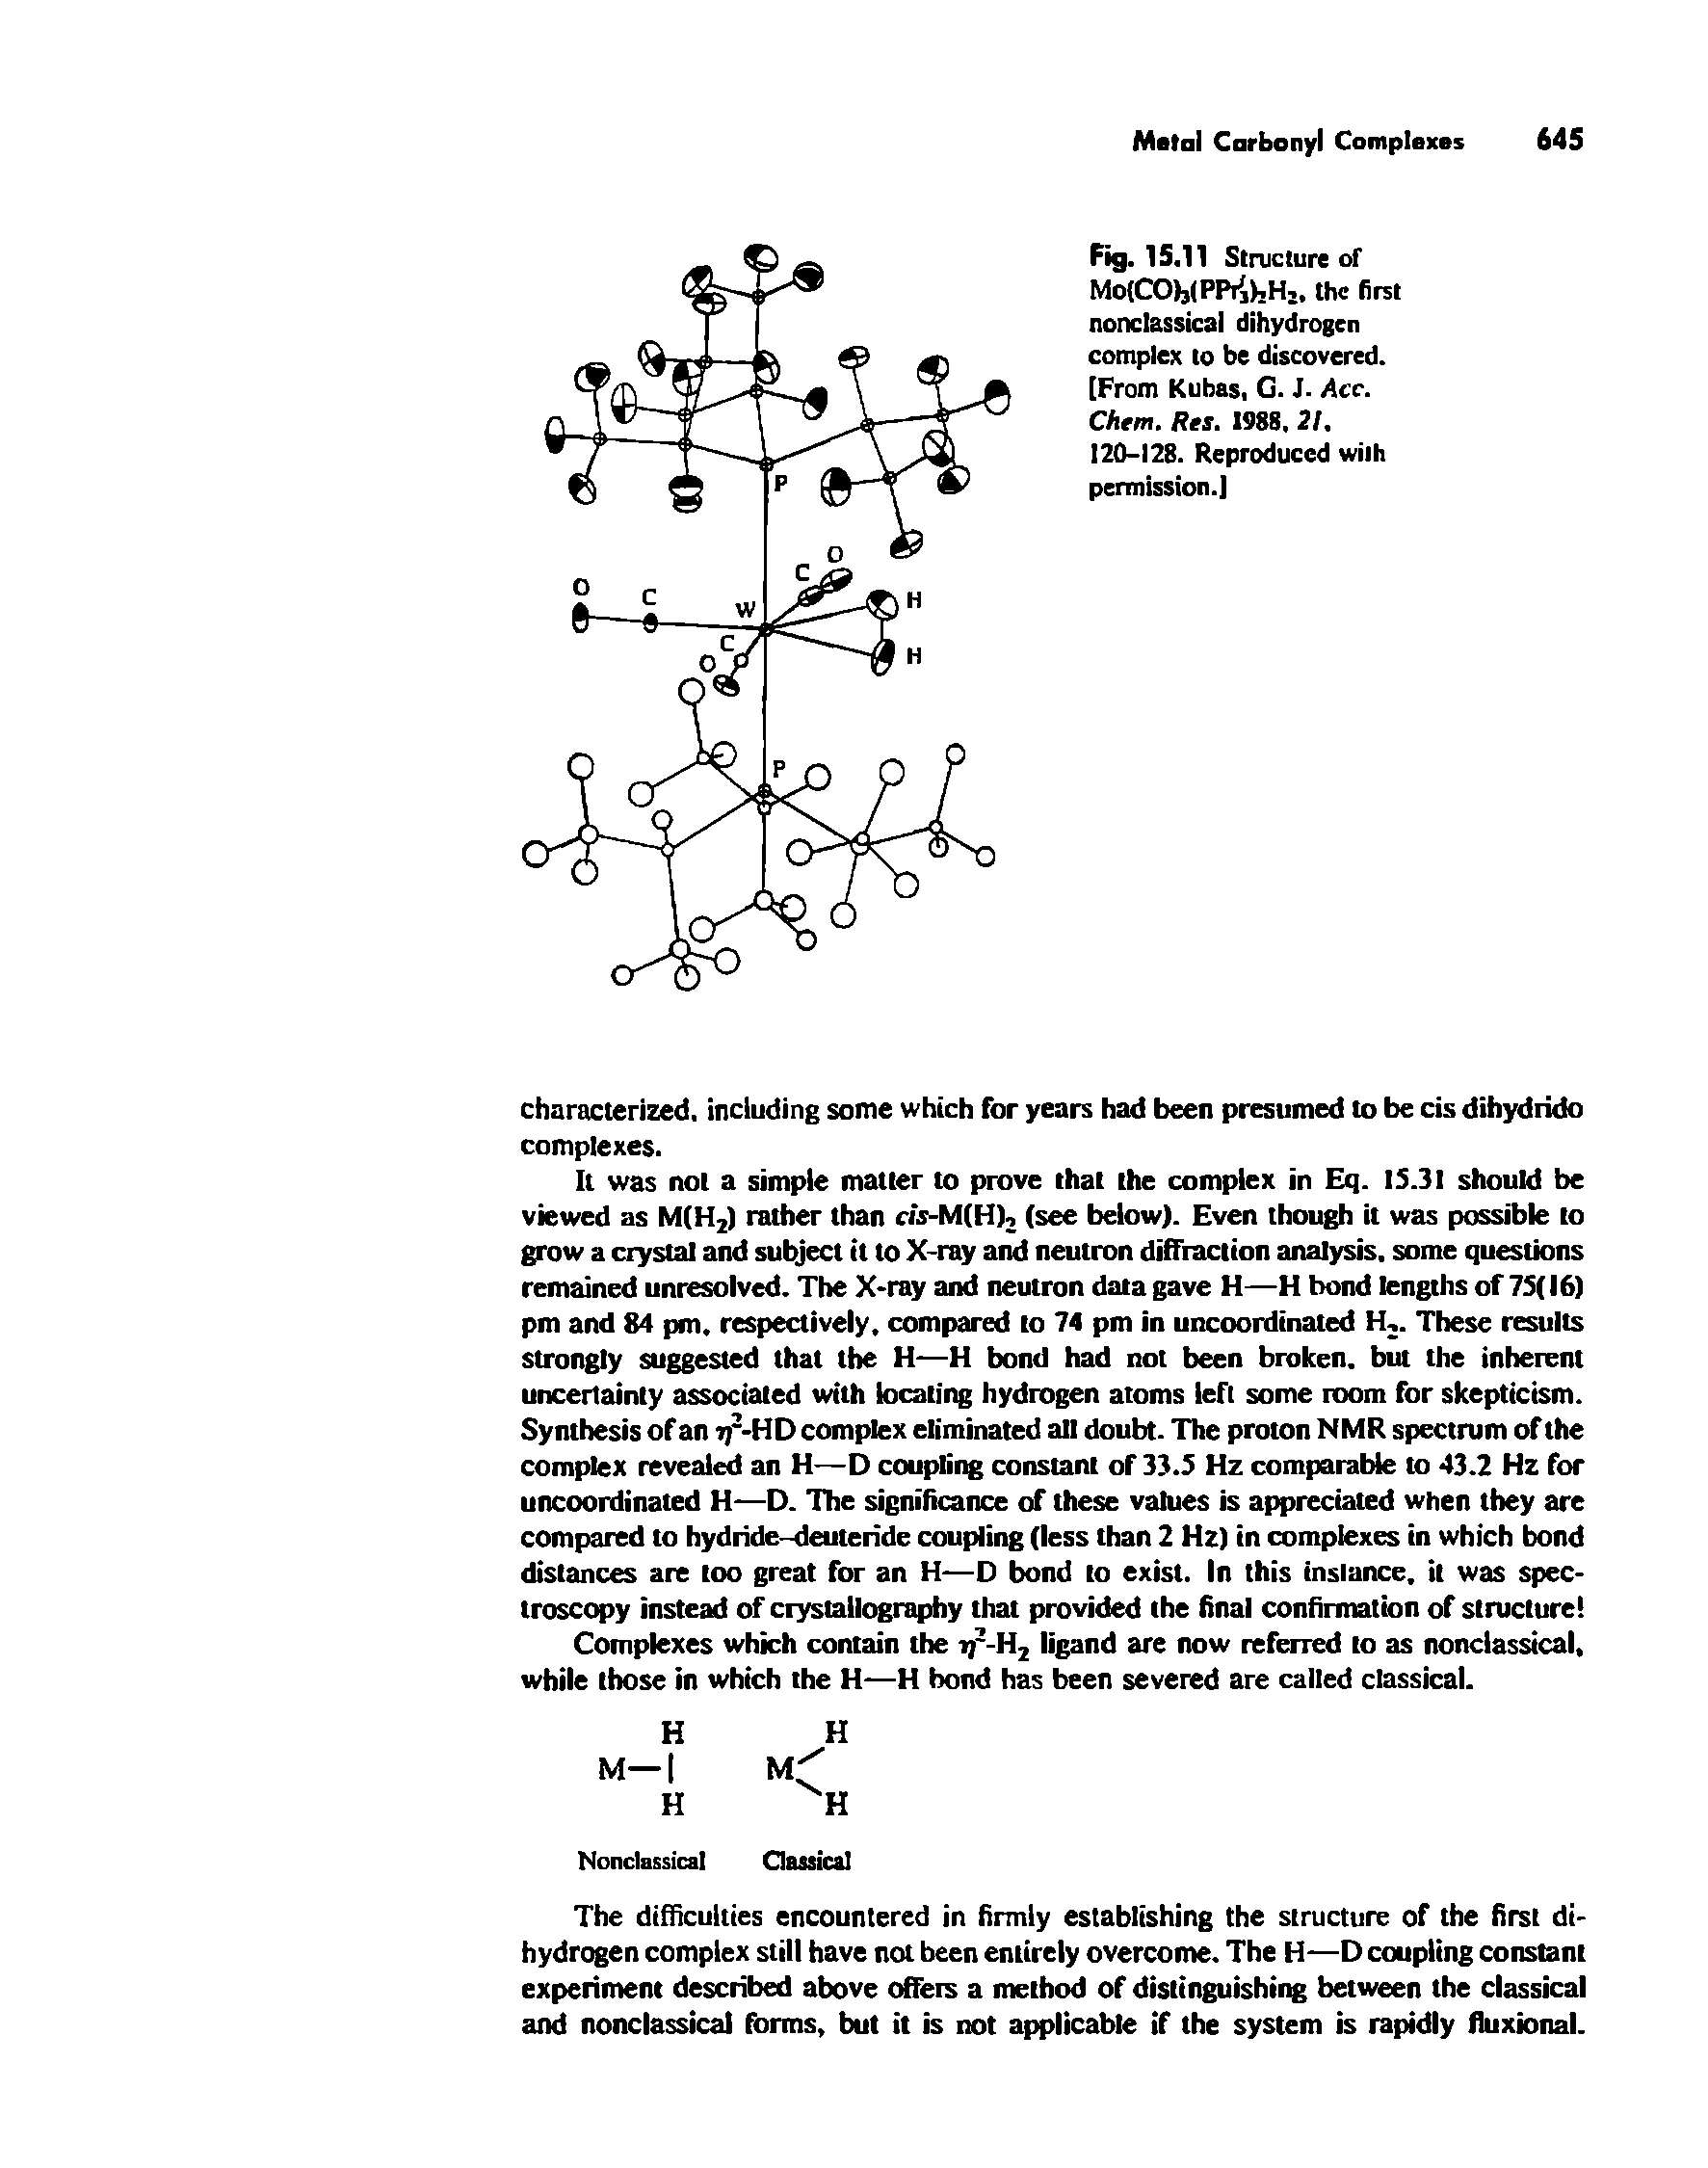 Fig. 15.11 Sinicture of MolCOMPiVilrH . the first nonclassical dihydrogen complex to be discovered. [From Kubas, G. J. Acc. Chem. Rts. 1988.21, 120-128. Reproduced wilh permission.]...